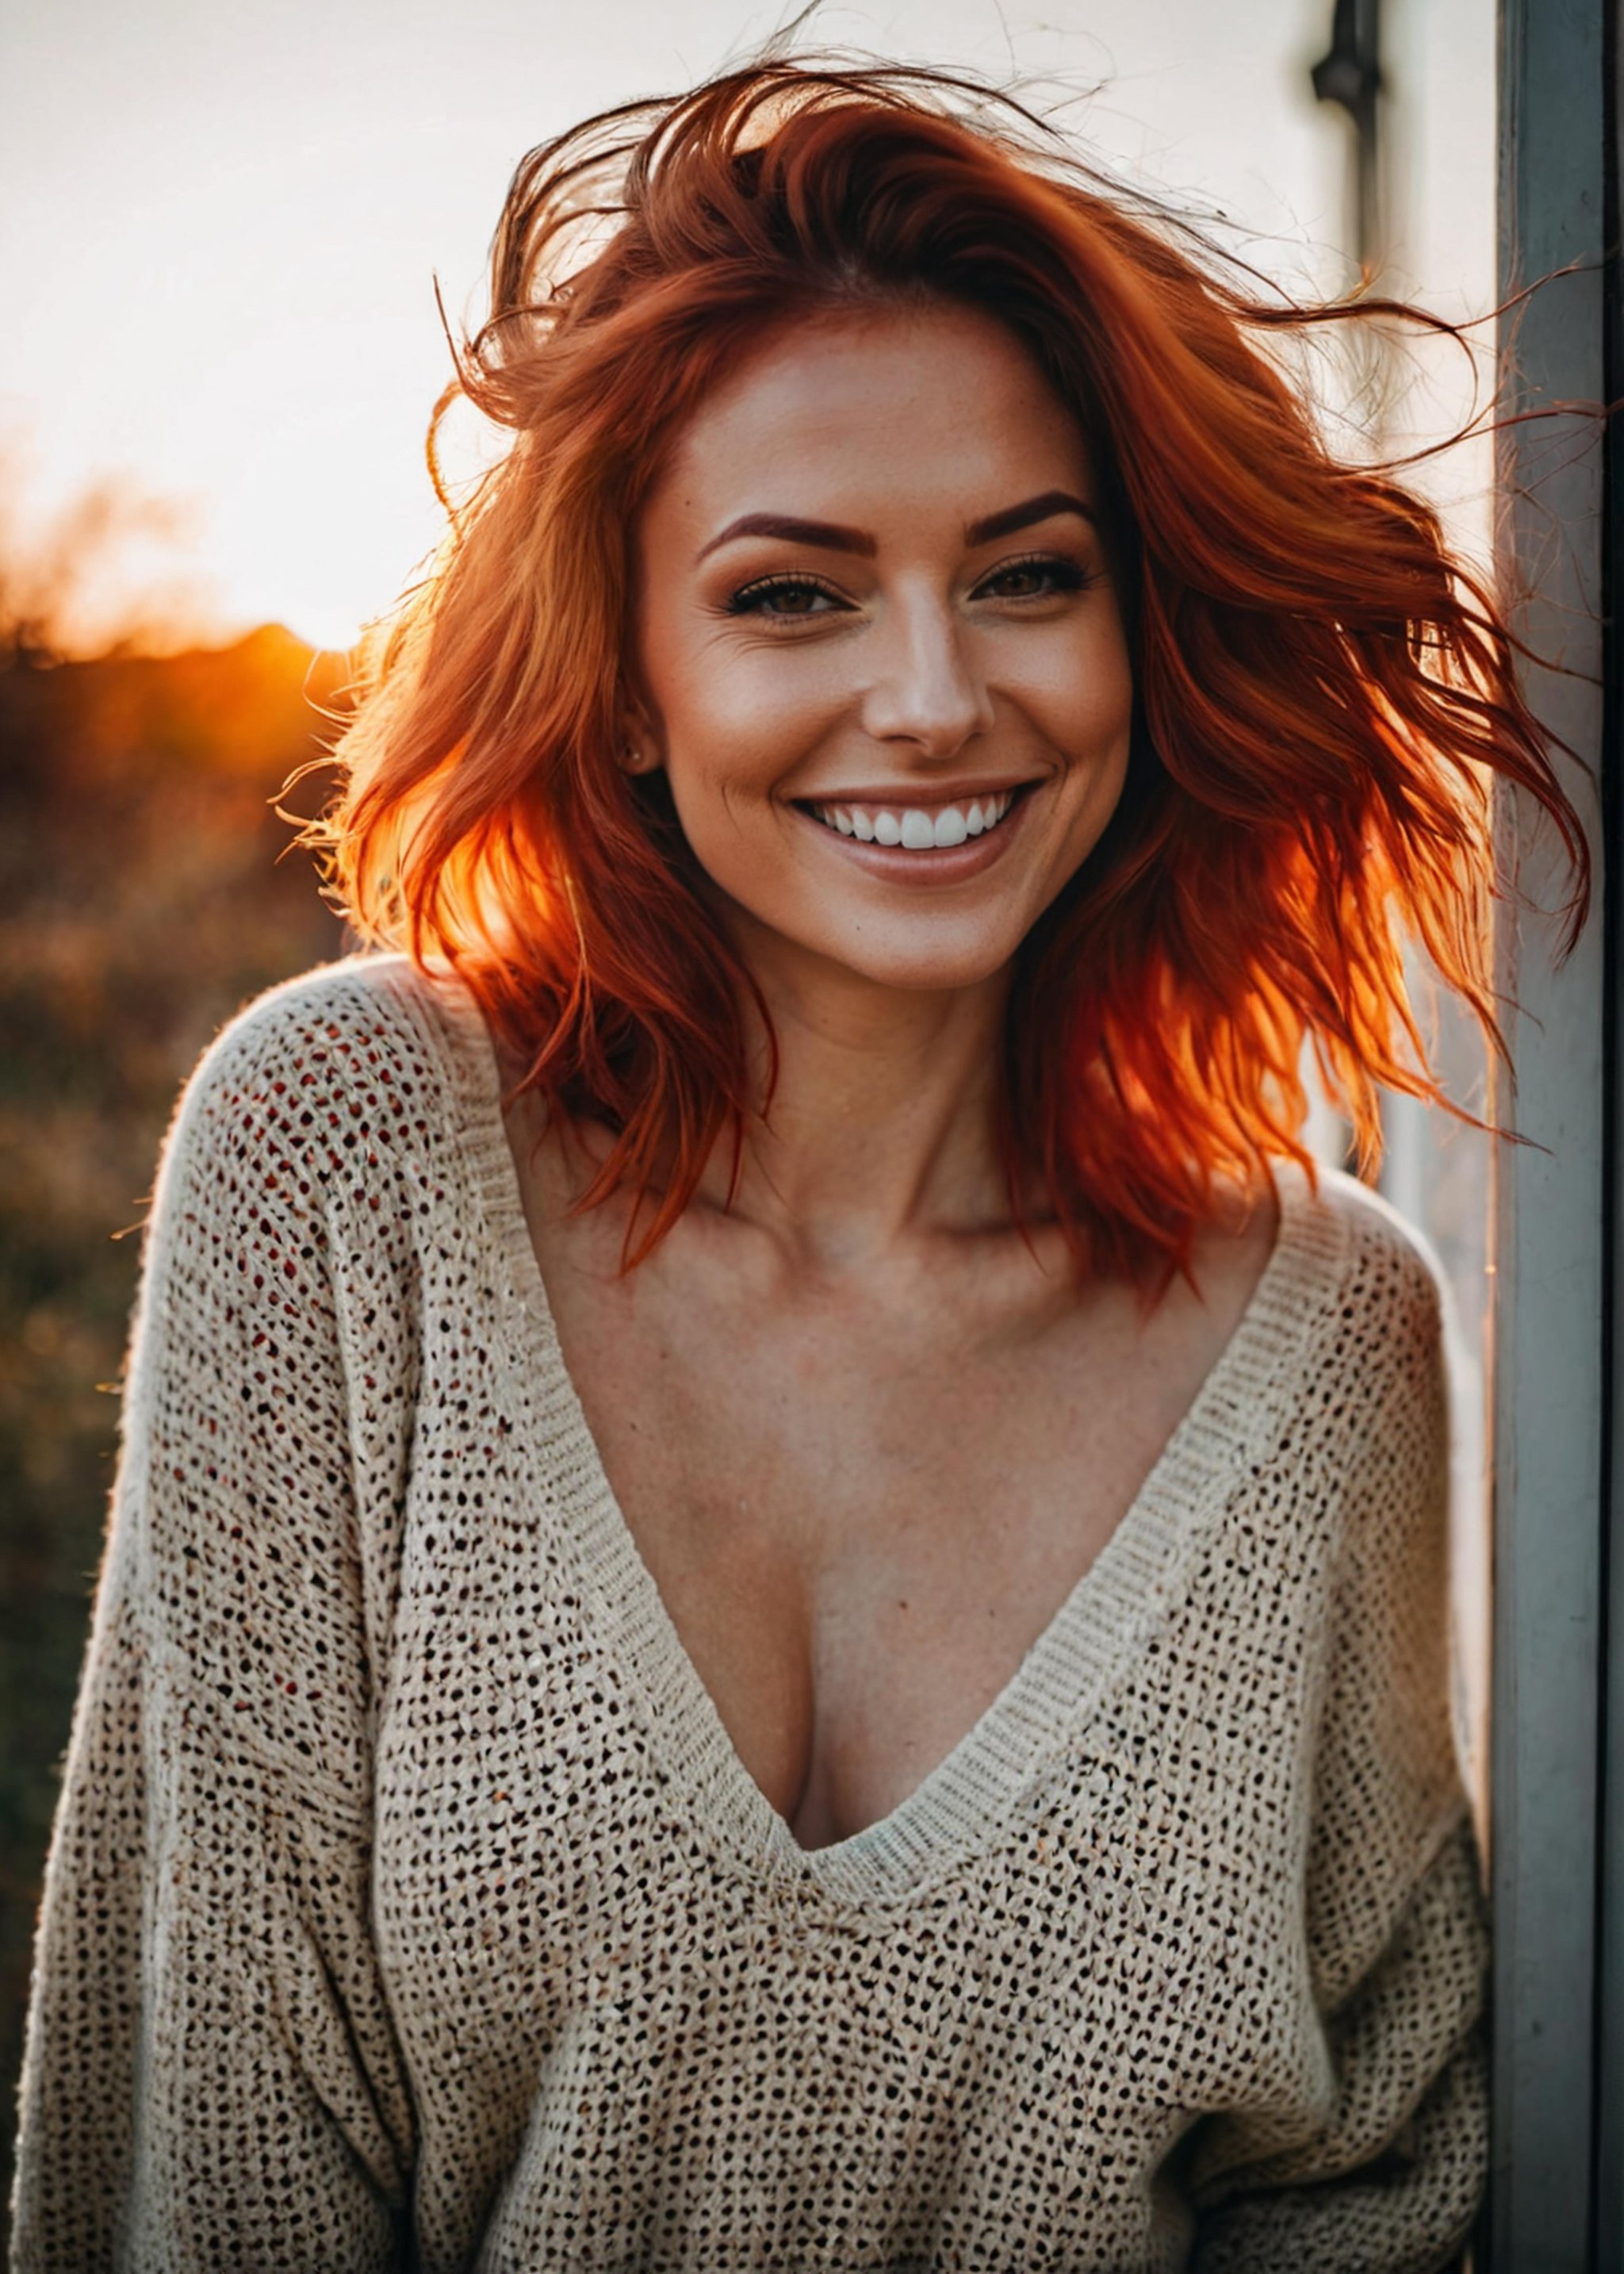 moody instagram photo,Ukrainian  woman, lower body photo of 32 years old woman, from below, dressed in long oversized sweater, teasing nudity, dirty fiery red hair, color gradient, bright tips of hair, sun-kissed skin, happy, cute smile, beautiful hazelnut eyes, hard shadows, dark, nighttime, overexposed filter, silhouetted against the bright light, Finely Articulated, Crisp Definition, 35mm photograph